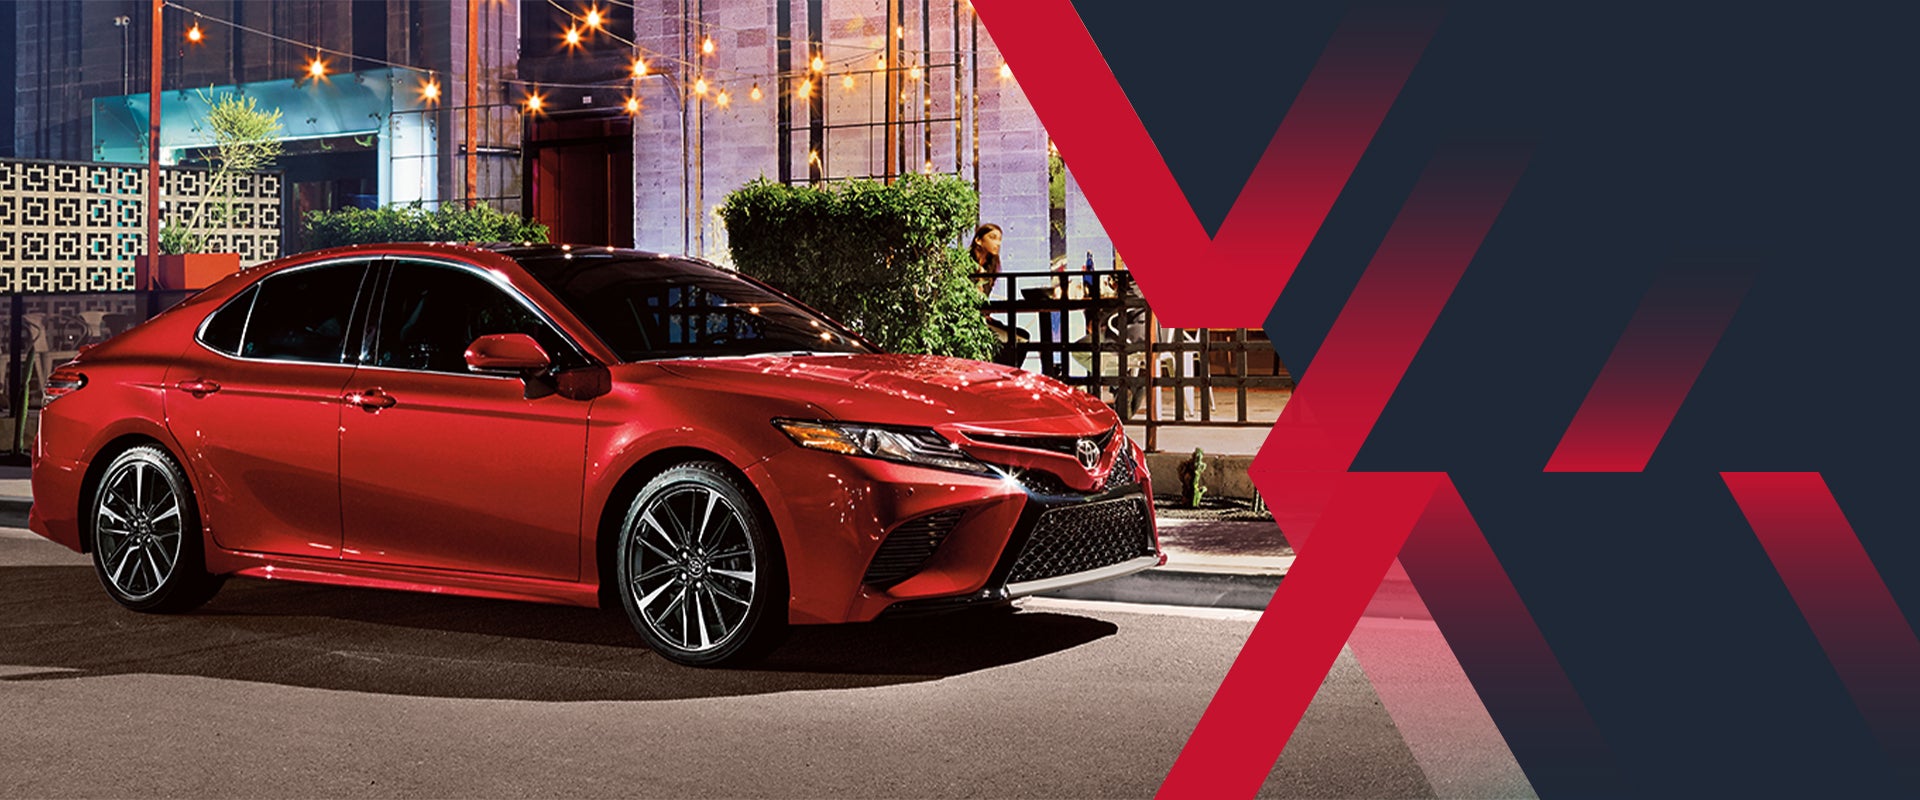 What vehicles qualify for The Fiore Lifetime Powertrain Warranty | Camry Parked on Road at Night | Fiore Toyota’s Lifetime Powertrain Warranty at Hollidaysburg